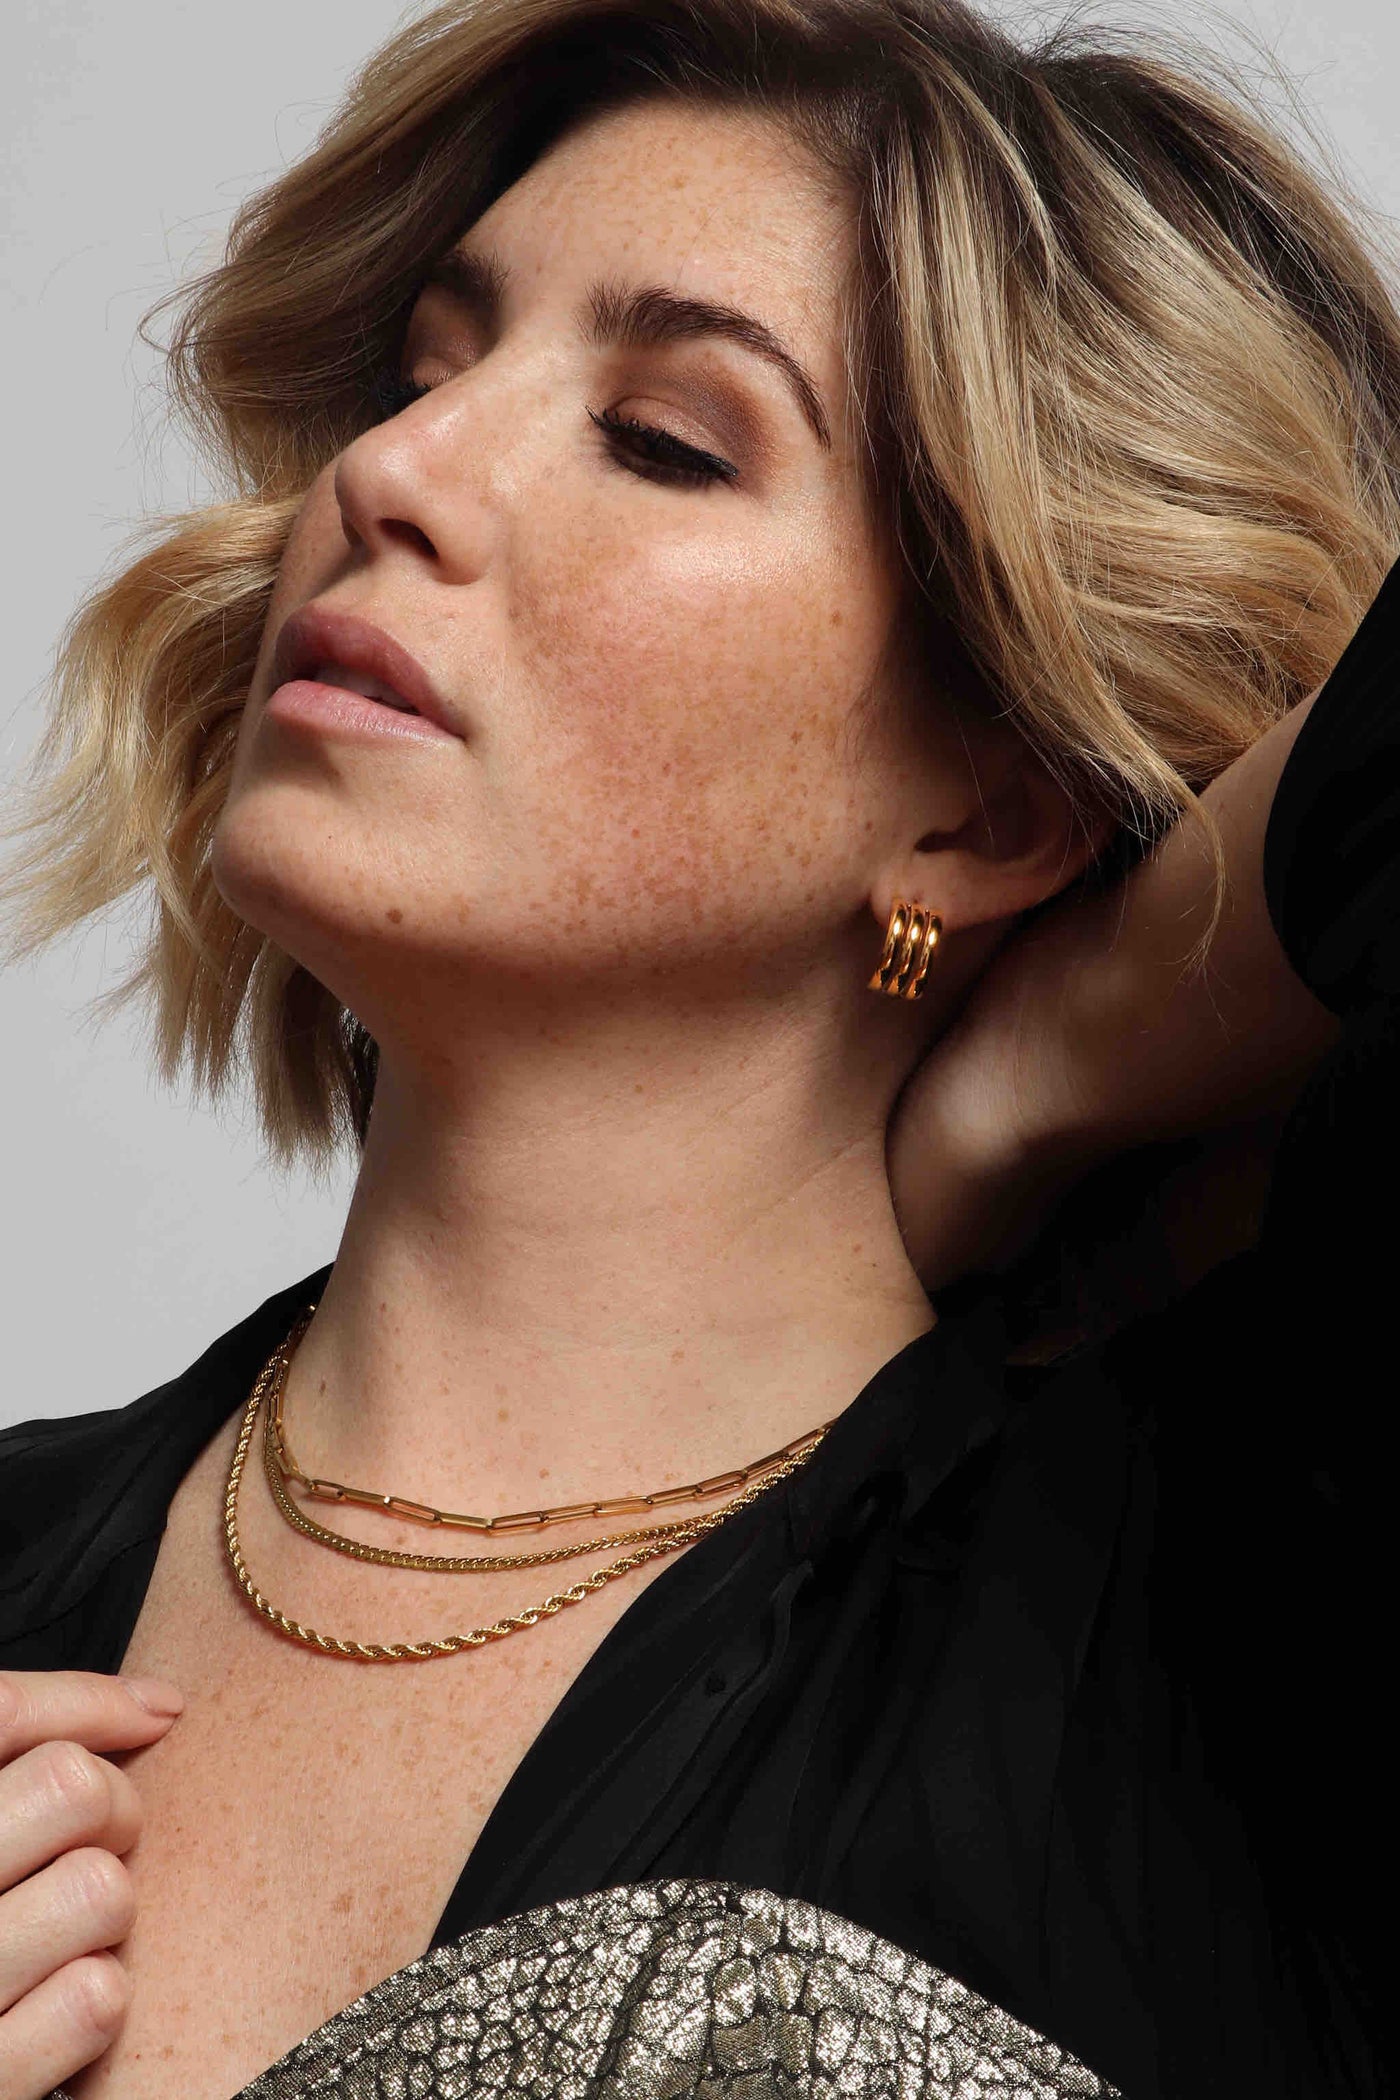 Jewelry stacks by Marrin Costello, featuring our 14k gold plated, stainless steel, water resistant, sustainable layers, like the triple ring Petra hoops, twisted rope Helix Chain in 3mm, flattened Billie Chain in 3mm width, elongated paperclip Empire chain, studded Melrose Band stacker ring, ball chain Crown Band stacker ring, diamond shaped Maverick signet ring, styled with a silk black button down top and metallic alligator embroidered printed bustier top.